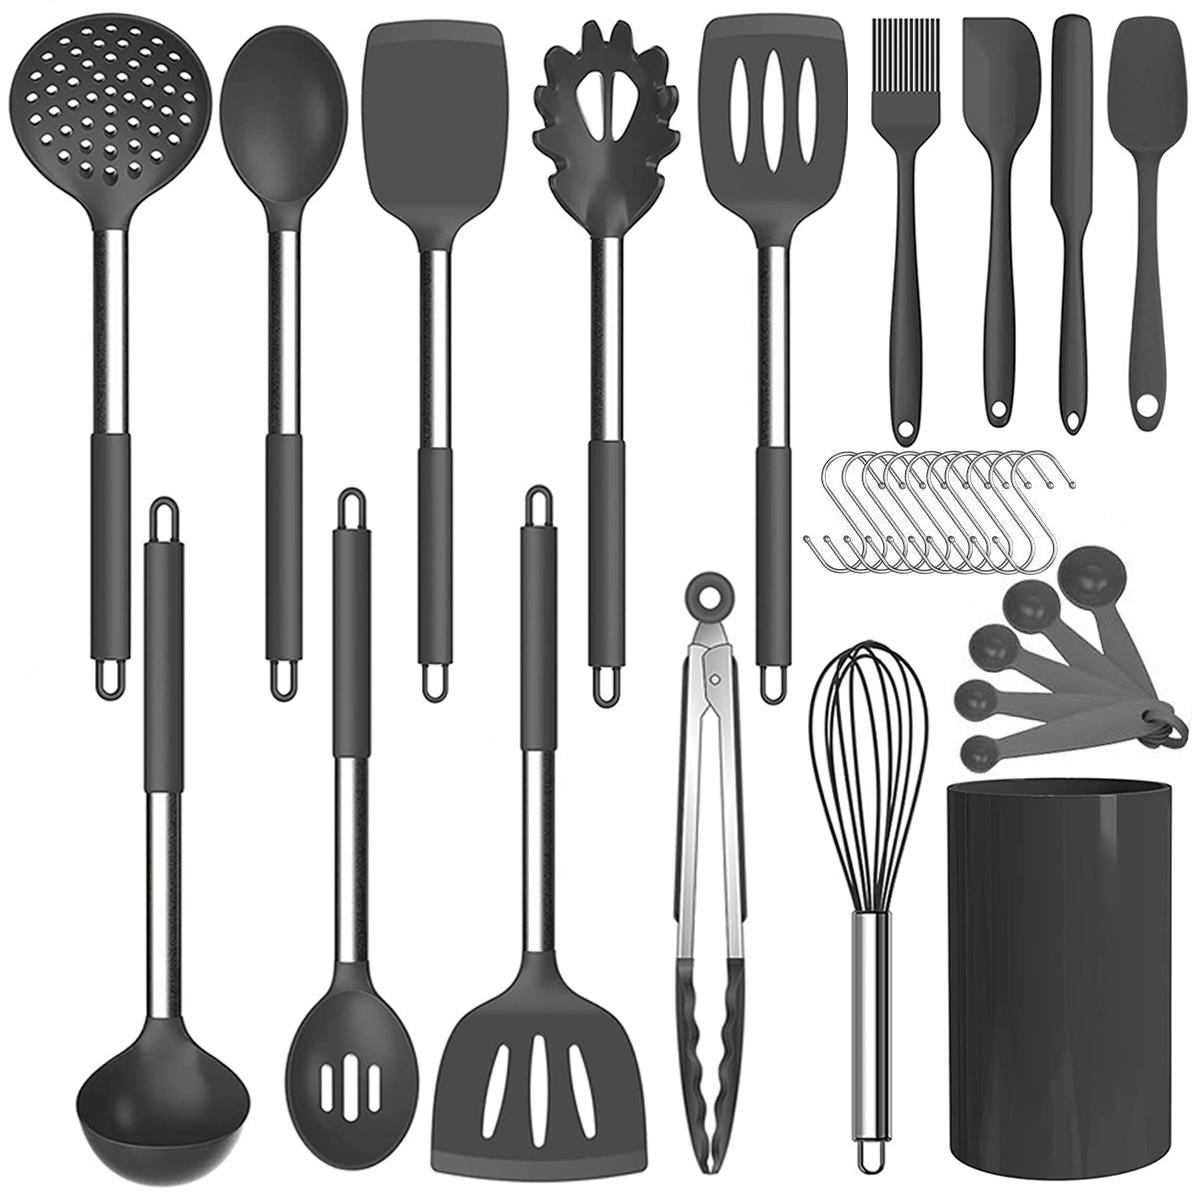 Cooking Utensil Set 13 Piece Stainless Steel Kitchen Tool Set with Holder,  Include Cooking Spoon, Spatula, Whisk, Cooking Tong and etc. 13 Pieces,It  will add color to your kitchen decor. BEST KITCHEN